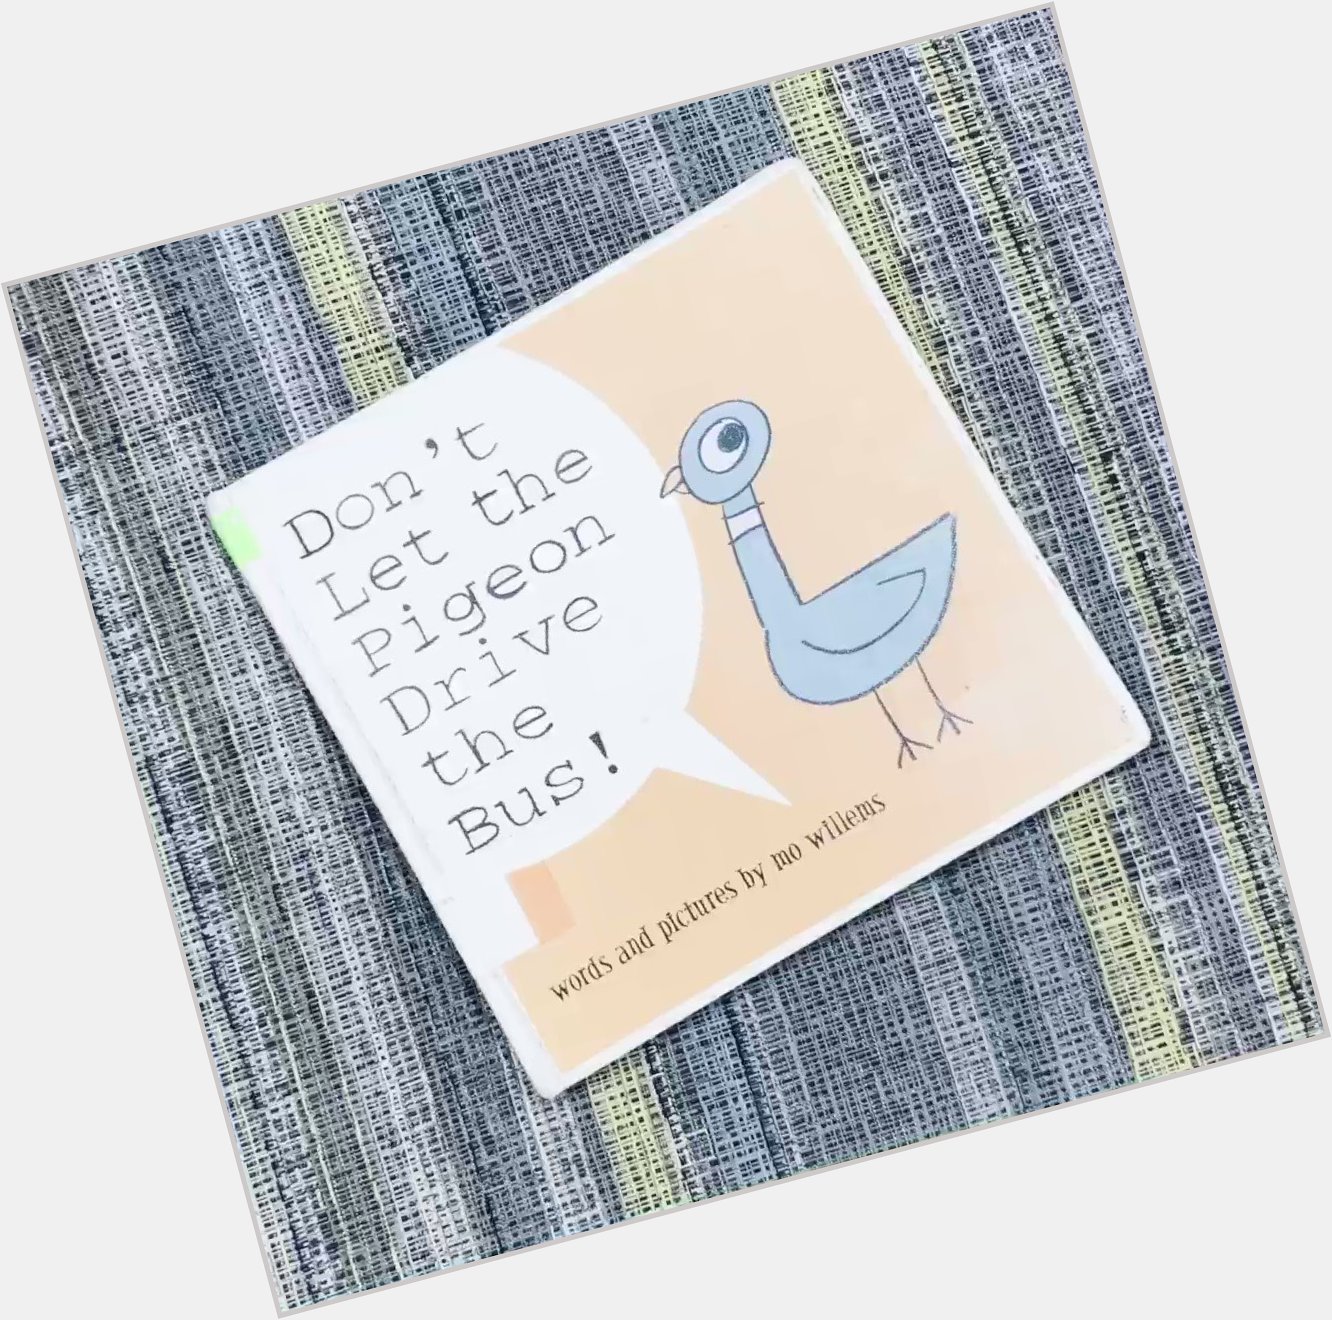 Happy Birthday Mo Willems! Who is your favorite Mo Willems character and why?  